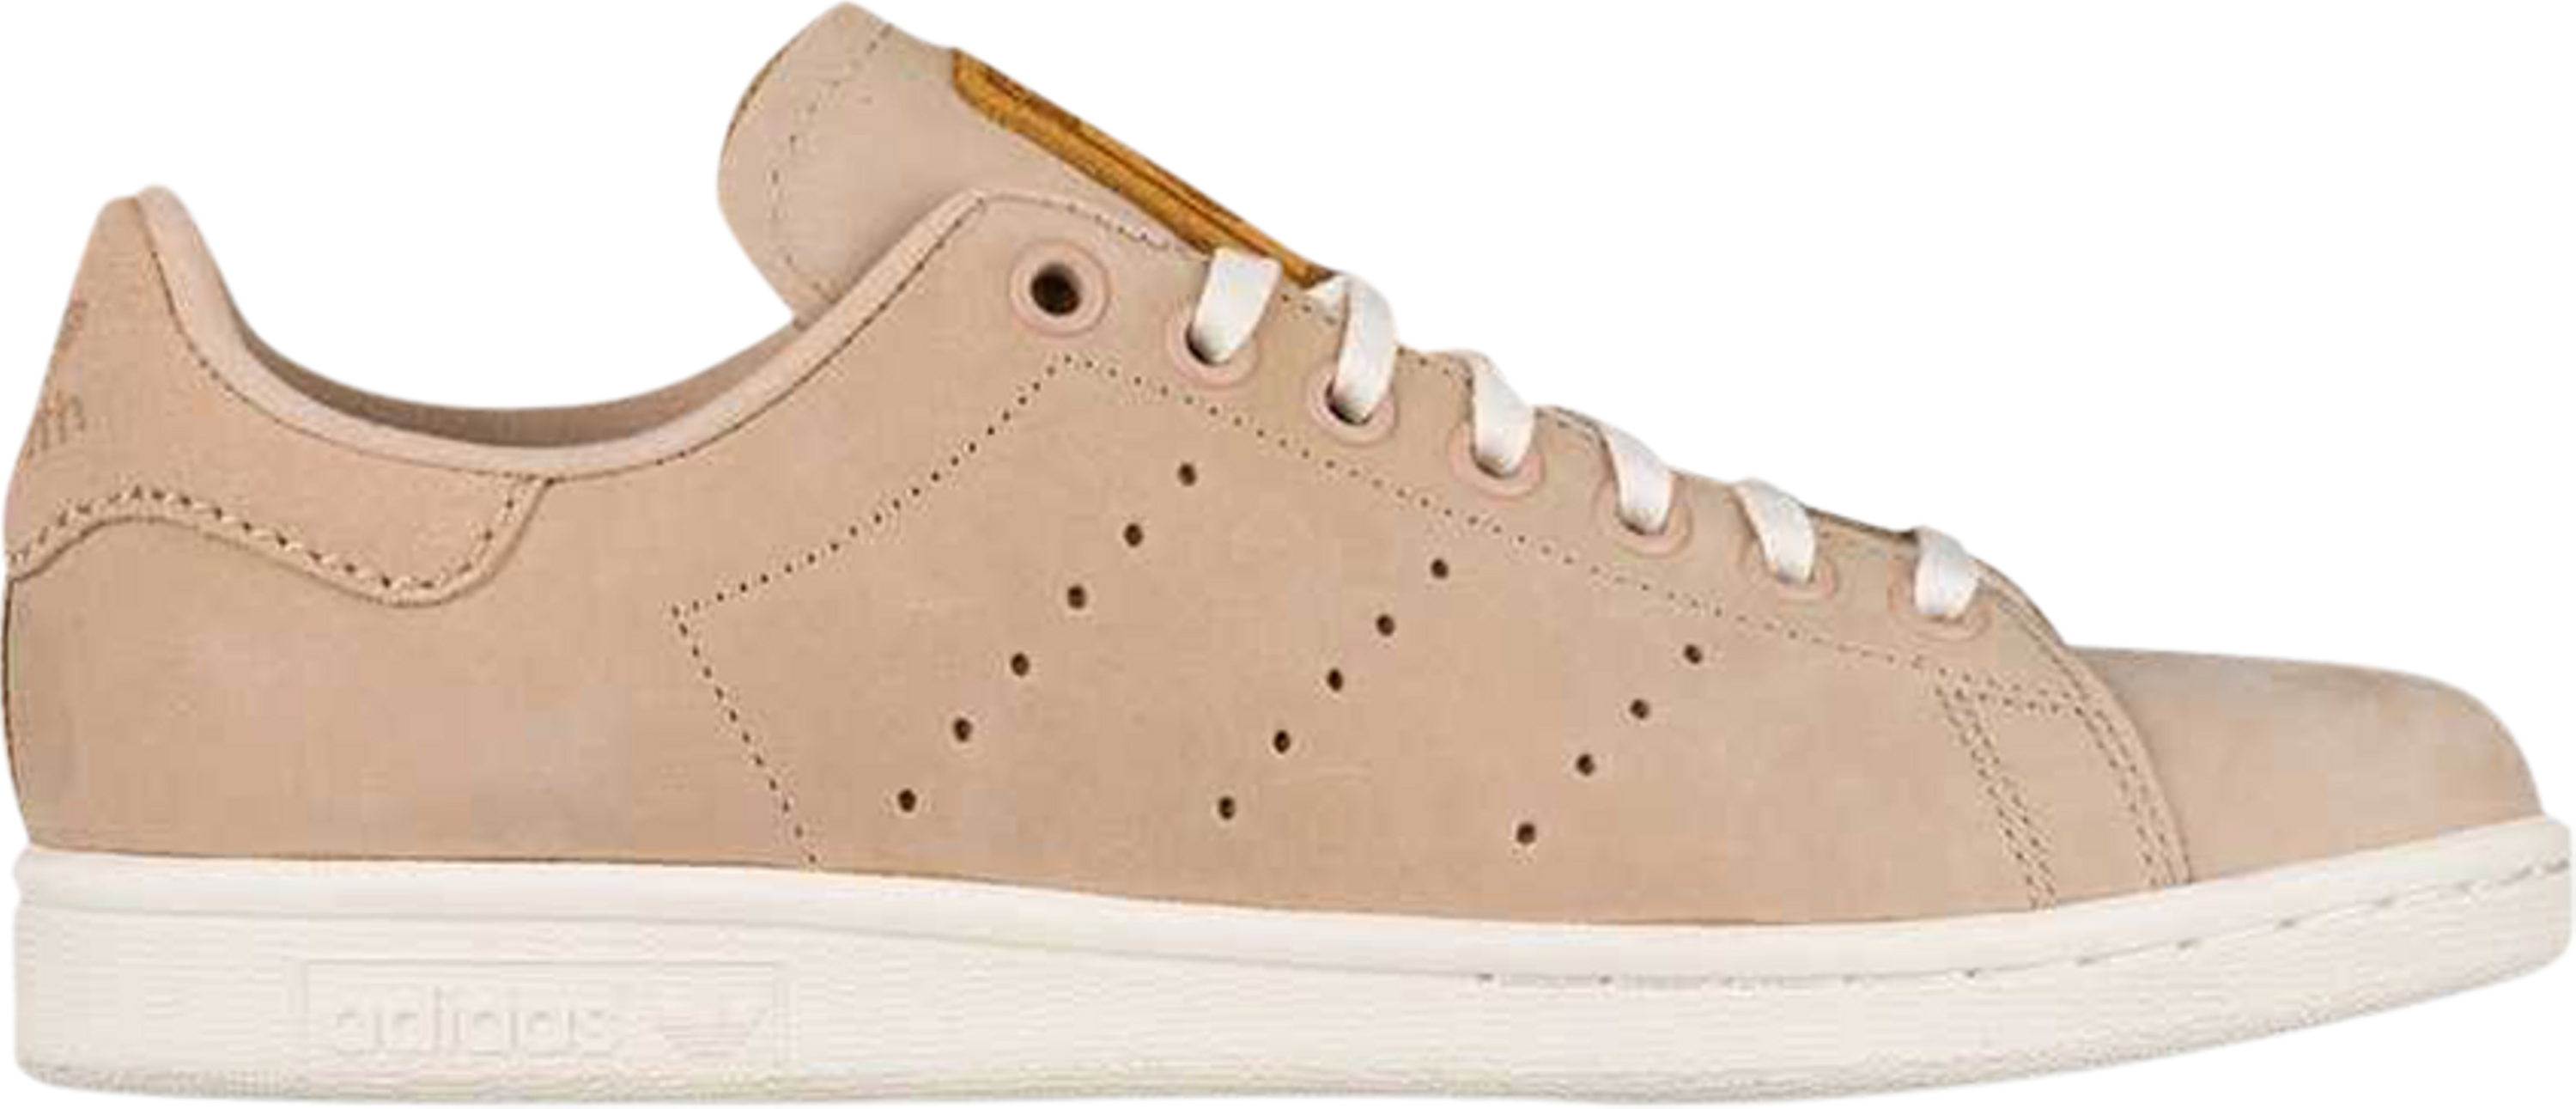 Buy Wmns Stan Smith Pale Nude S82264 Goat Uk